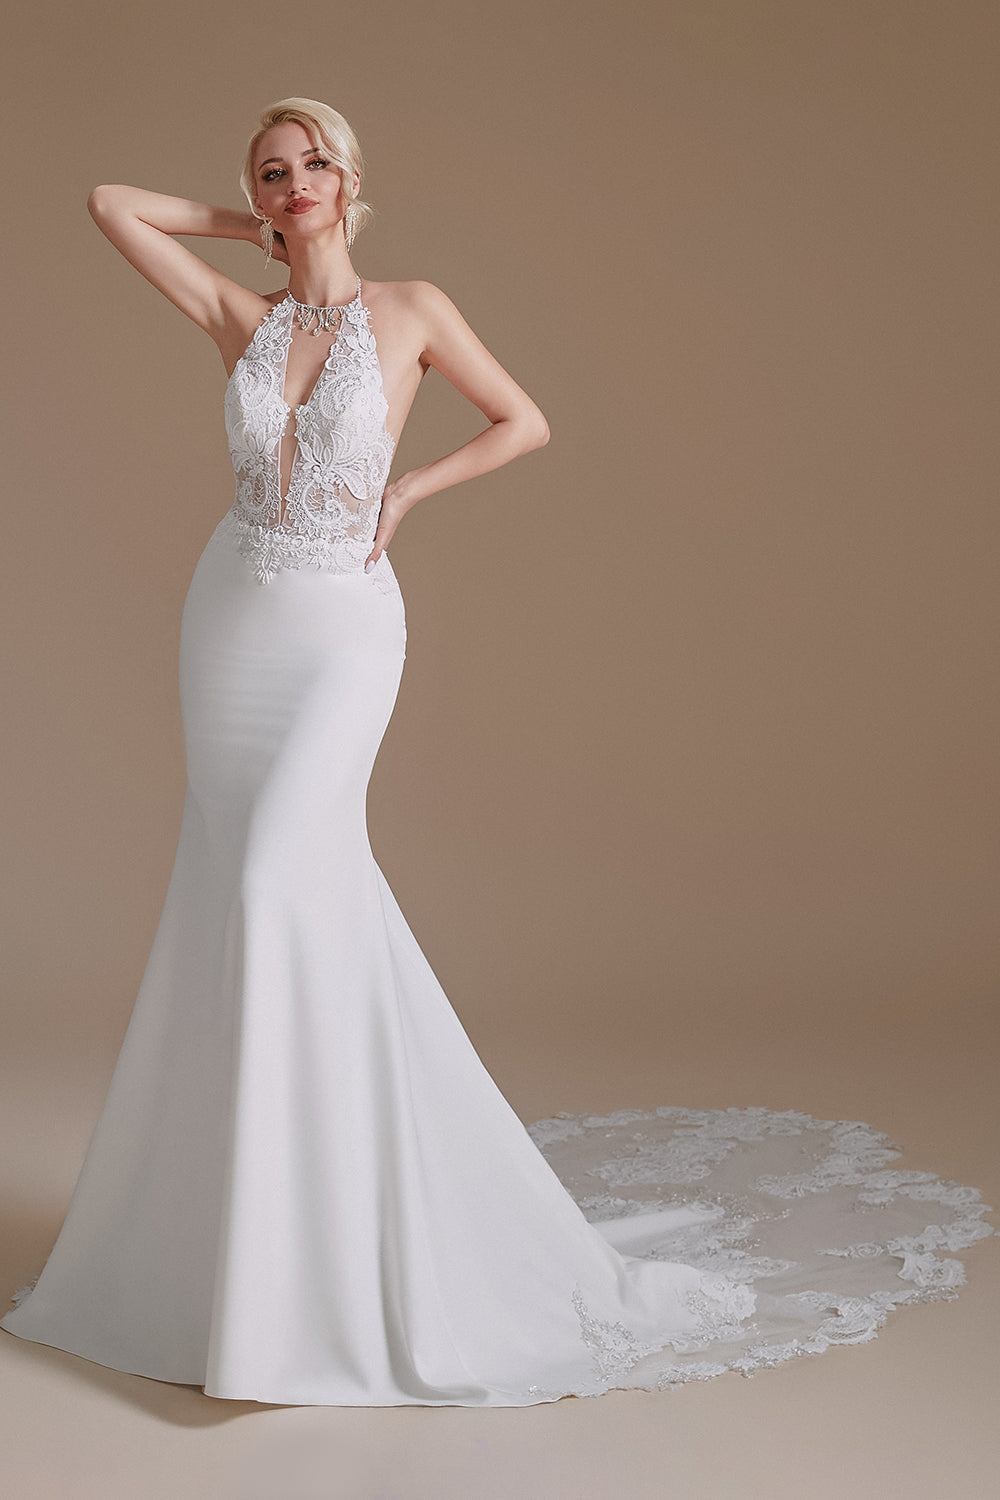 White Mermaid Halter Backless Sweep Train Wedding Dress with Lace